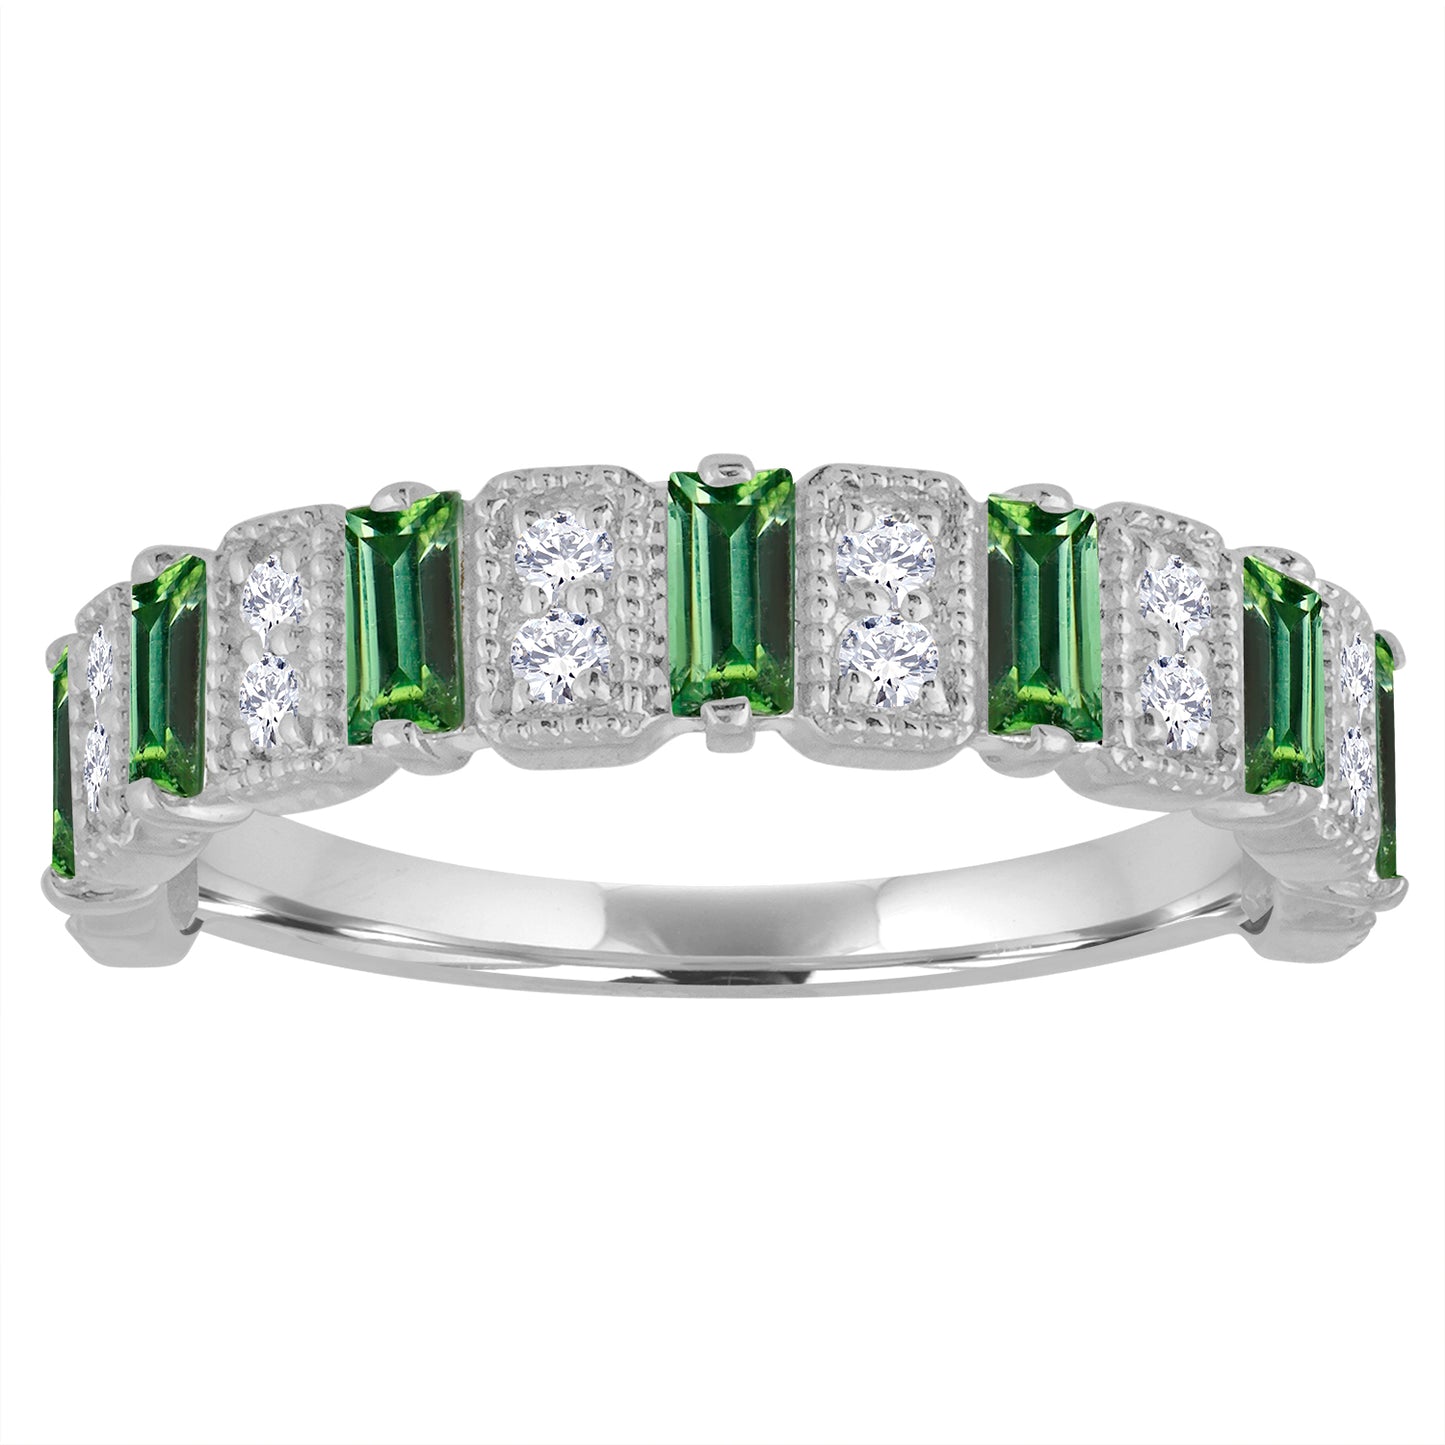 White gold wide band with emerald baguettes and round diamonds.